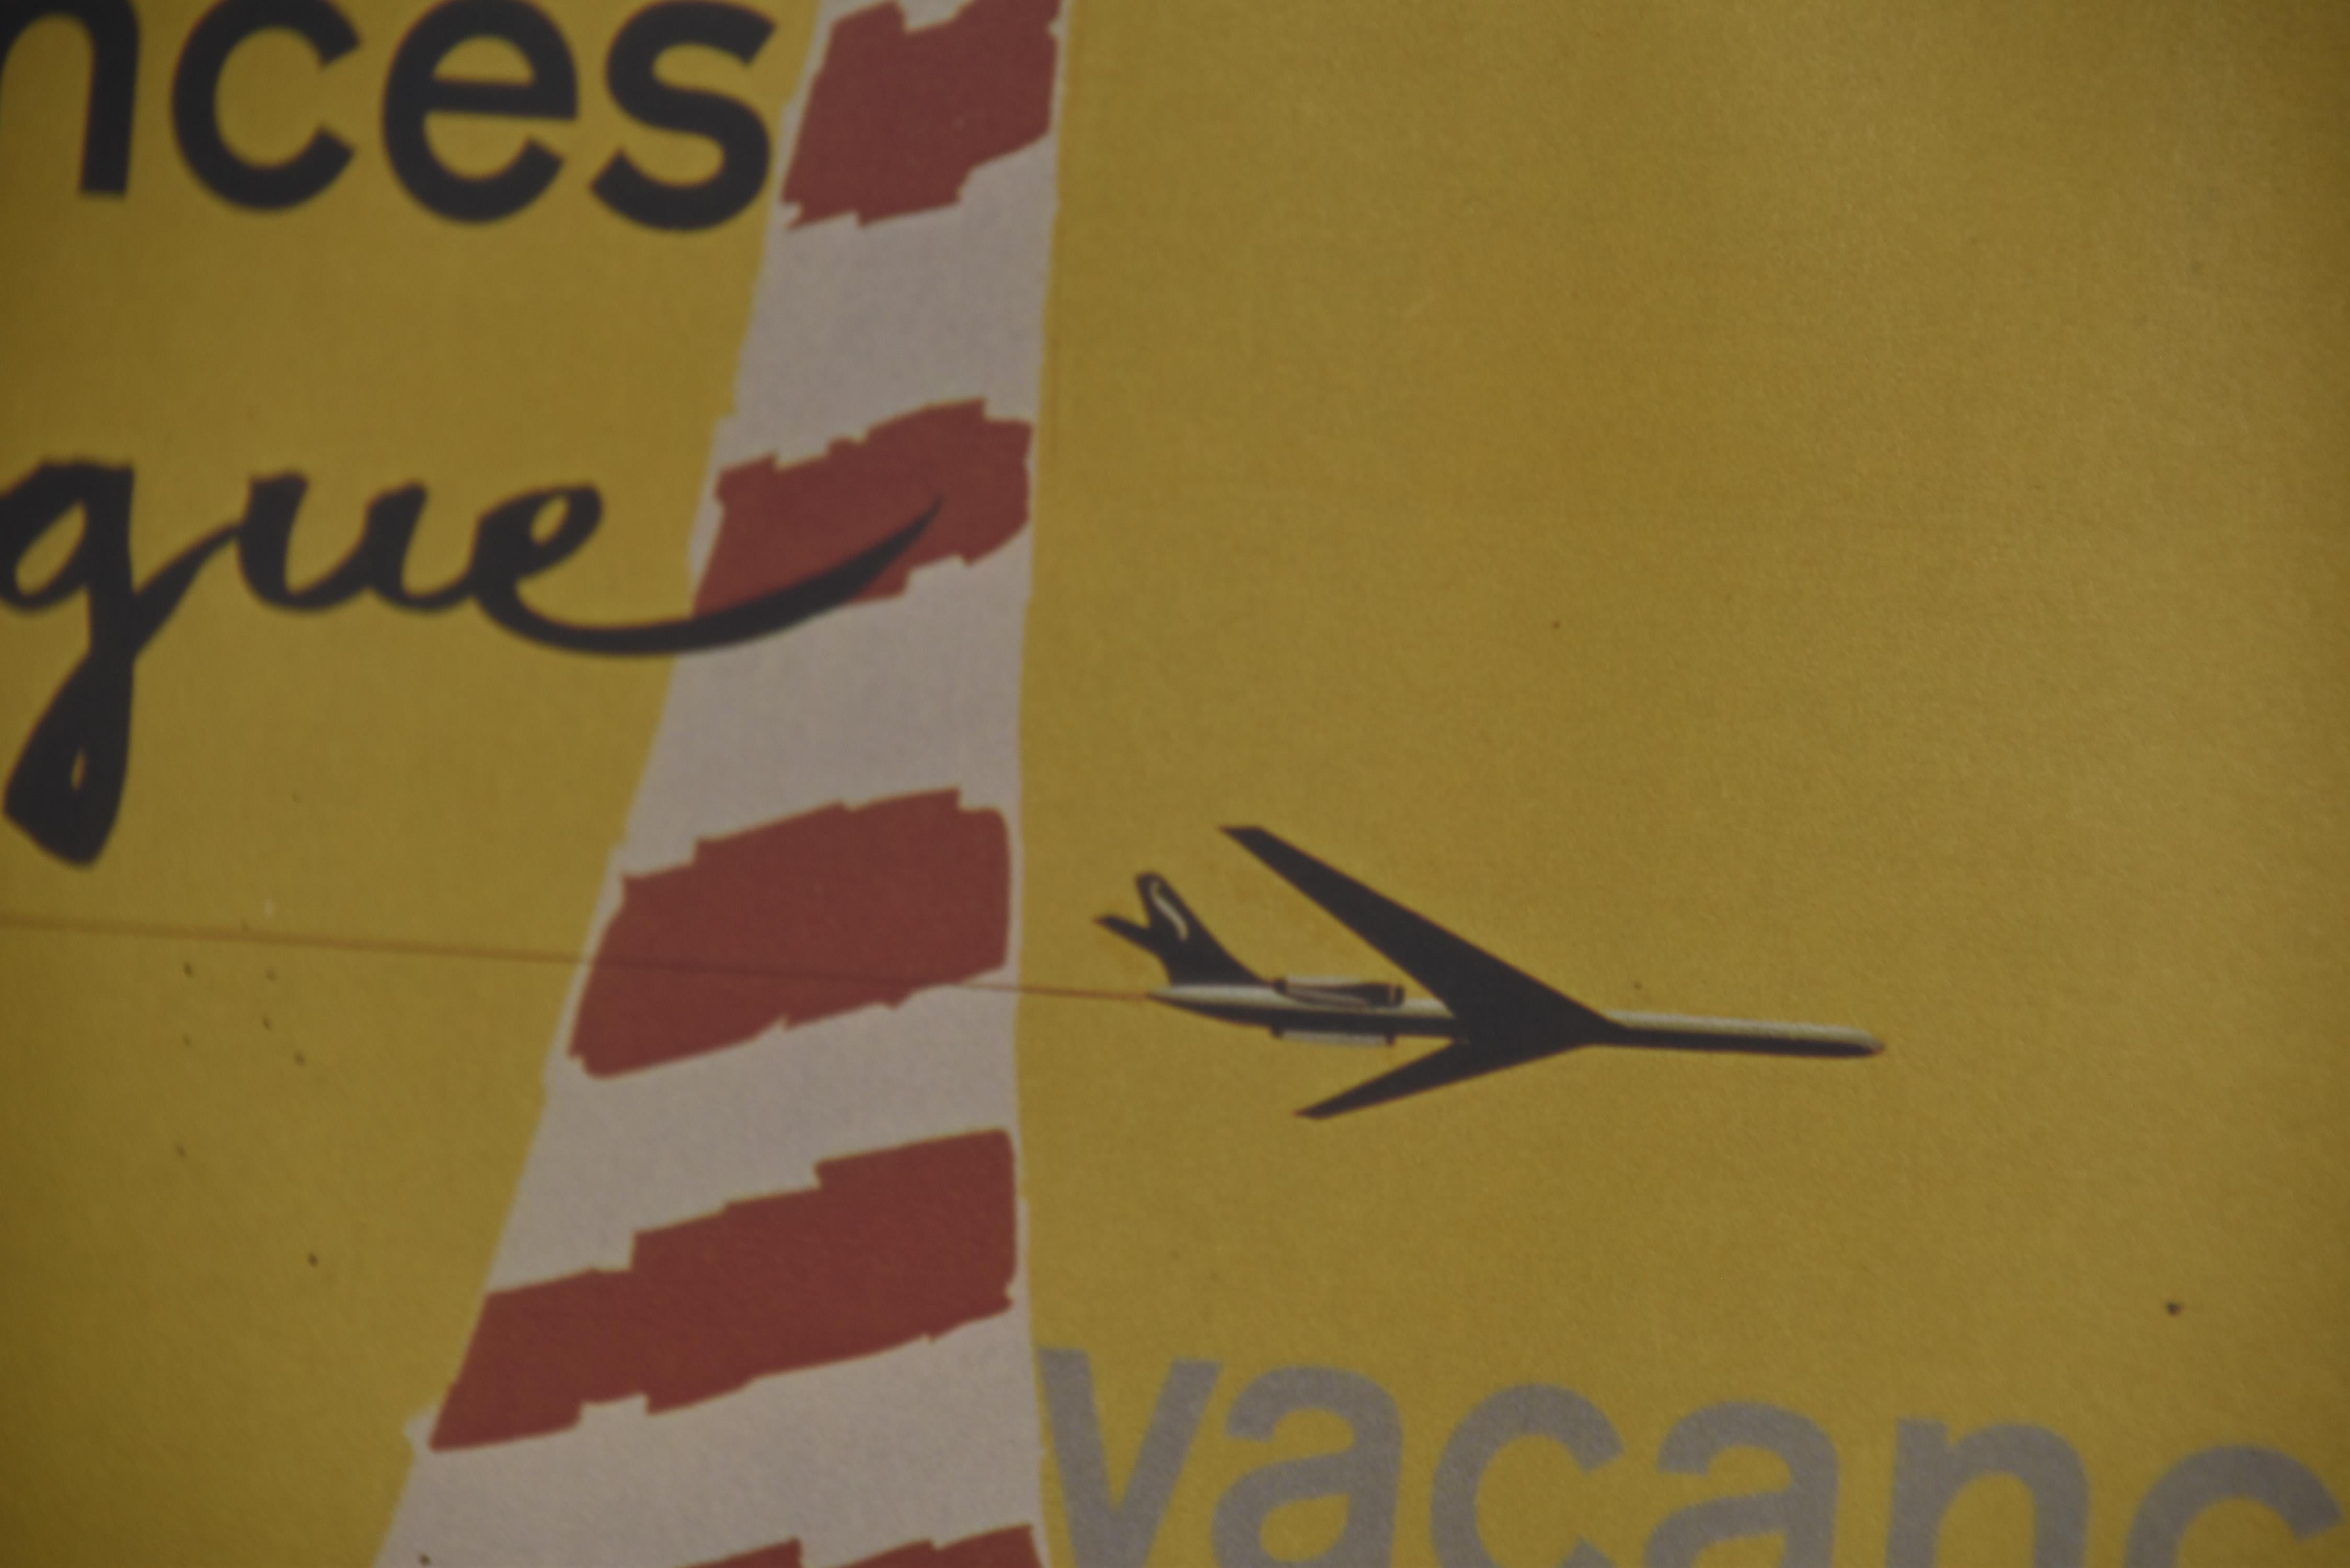 Vintage publicity poster for belgian airline company Sabena.

1960s - Belgium

Height: 52cm/20.47